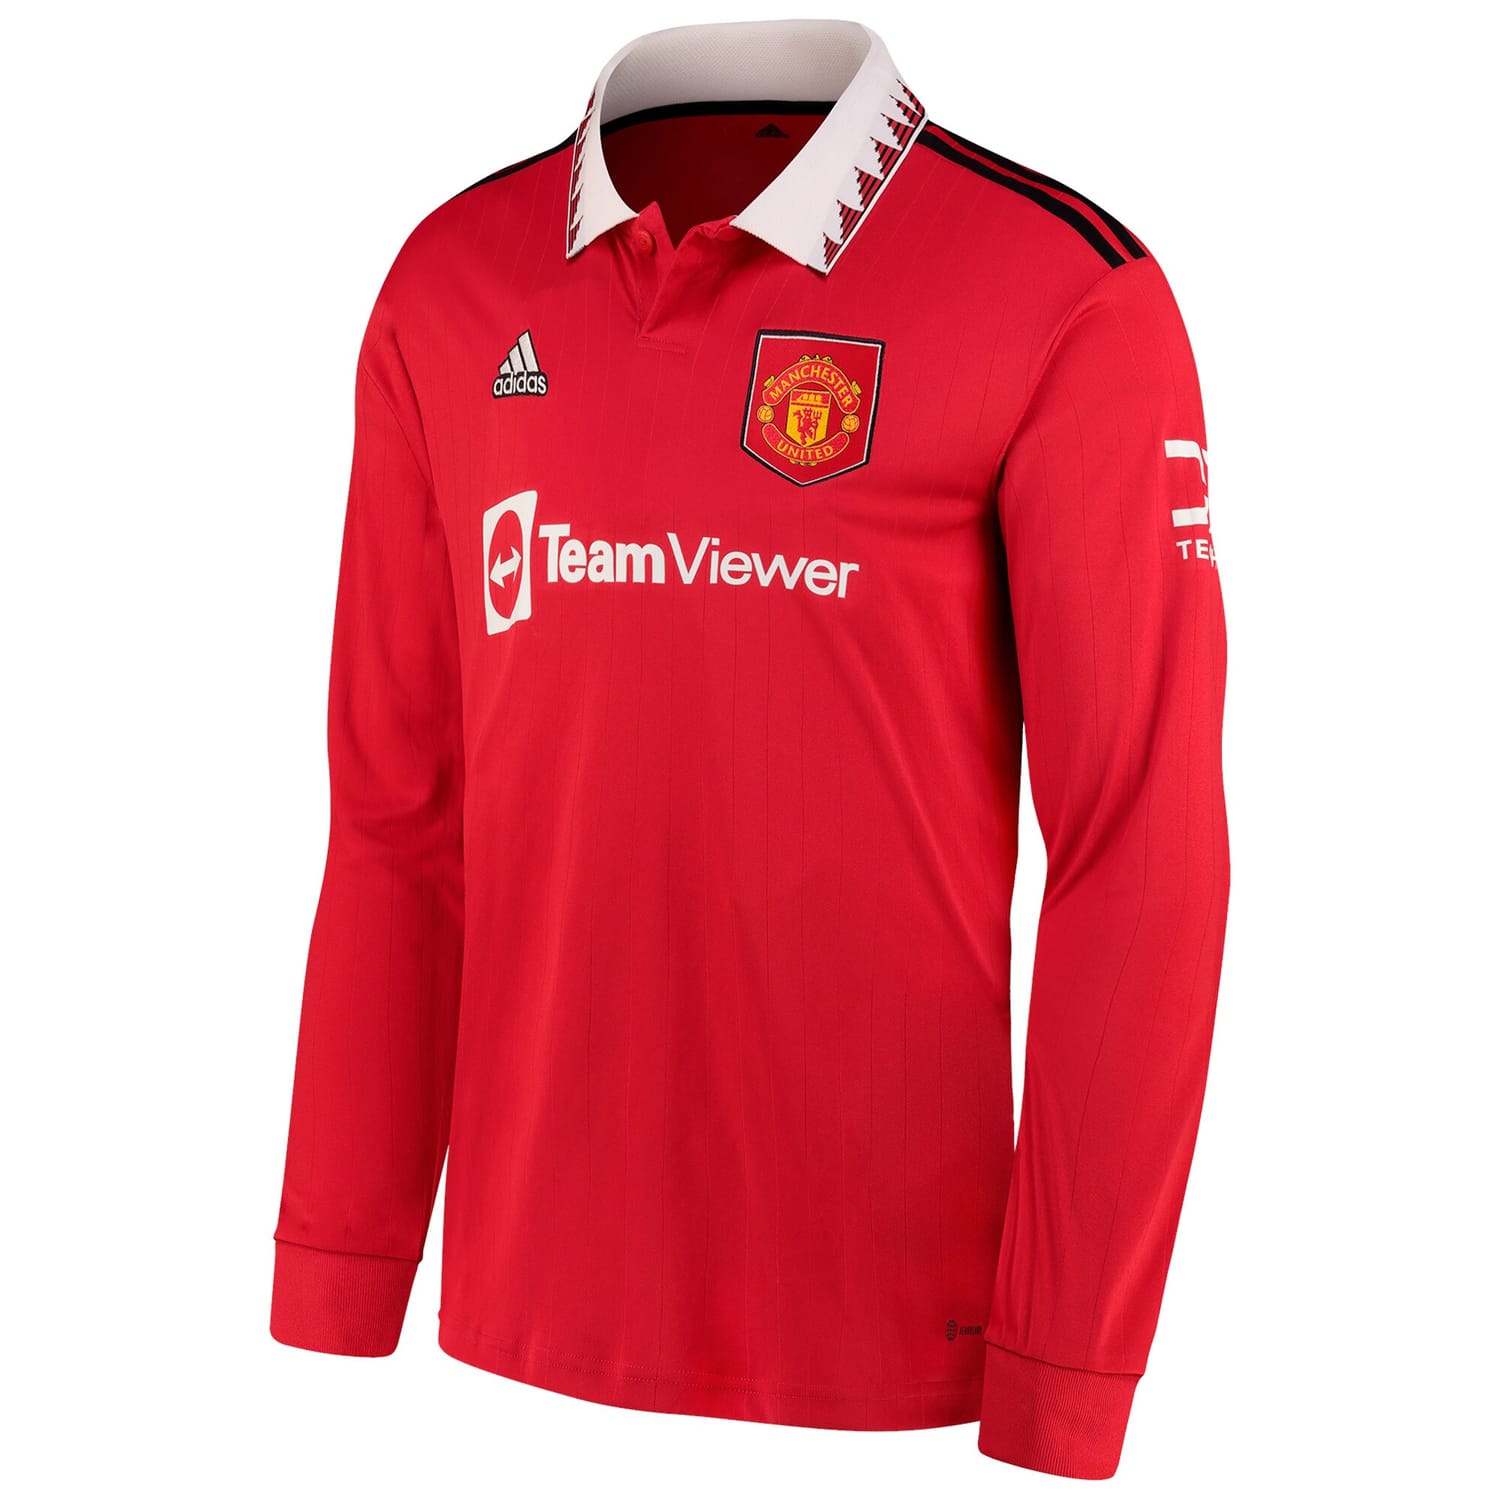 Premier League Manchester United Home Jersey Shirt Long Sleeve 2022-23 player Fred 17 printing for Men